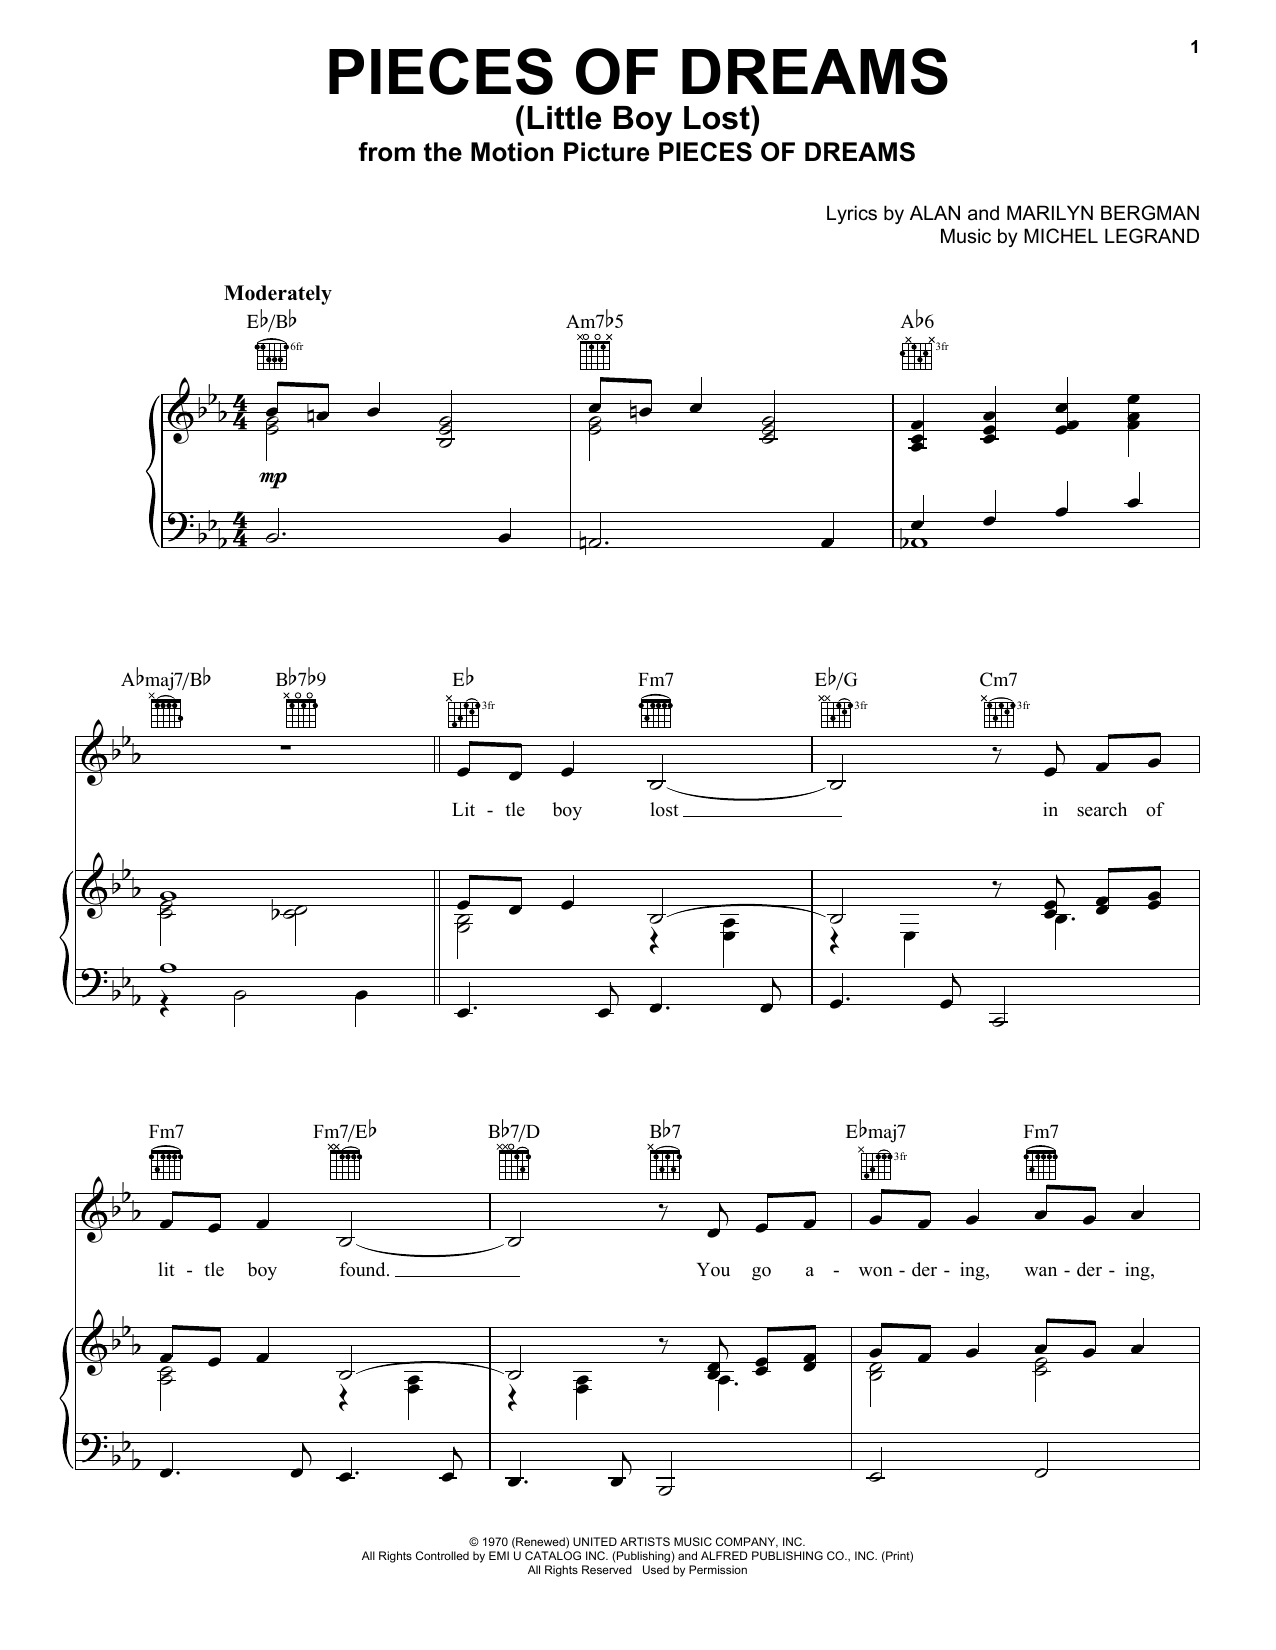 Alan Bergman Pieces Of Dreams (Little Boy Lost) sheet music notes and chords. Download Printable PDF.